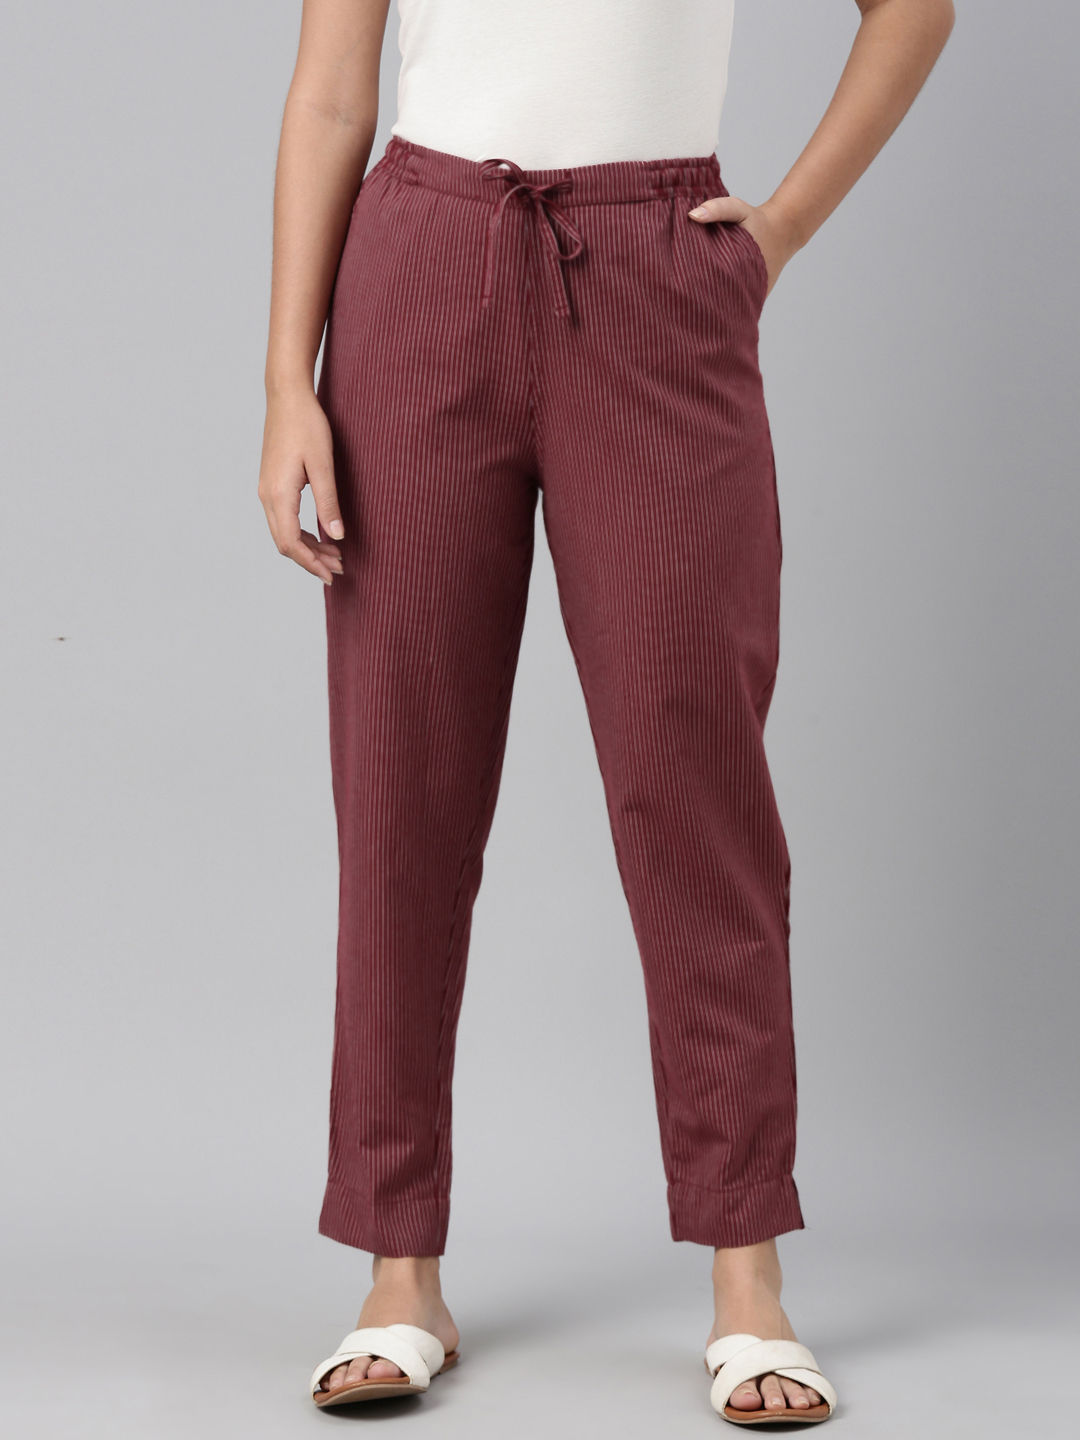 AND Regular Fit Women Black Trousers  Buy AND Regular Fit Women Black  Trousers Online at Best Prices in India  Flipkartcom